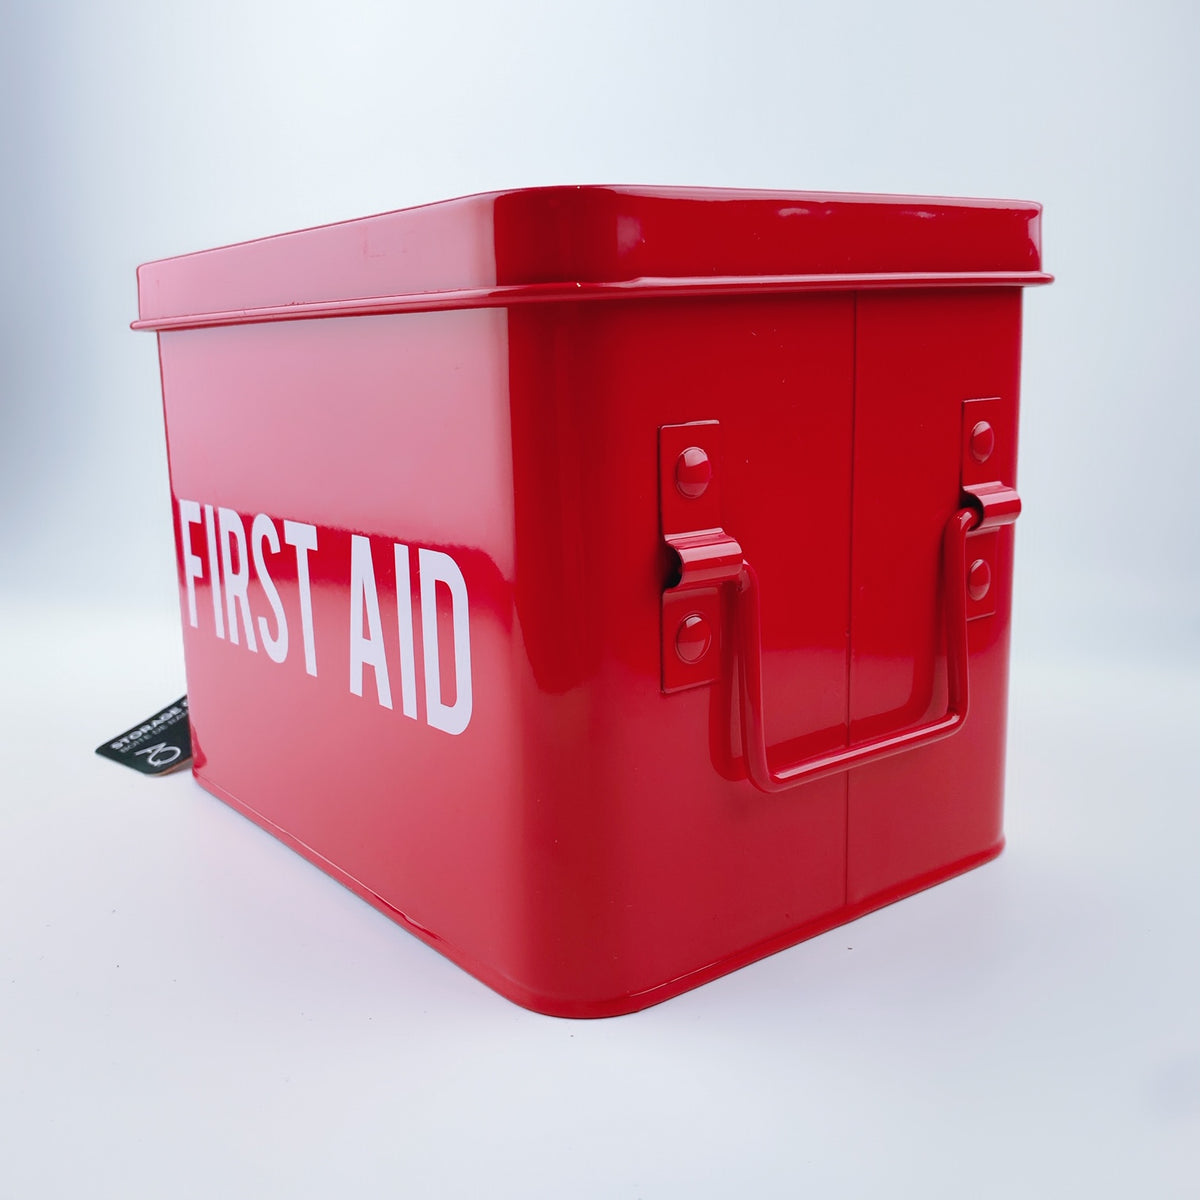 Funly mee Vintage First aid Box for Home, Medicine Tin, Red Metal Medicine  Storage Box (Large 12.6× 8.3×7.7 inches)